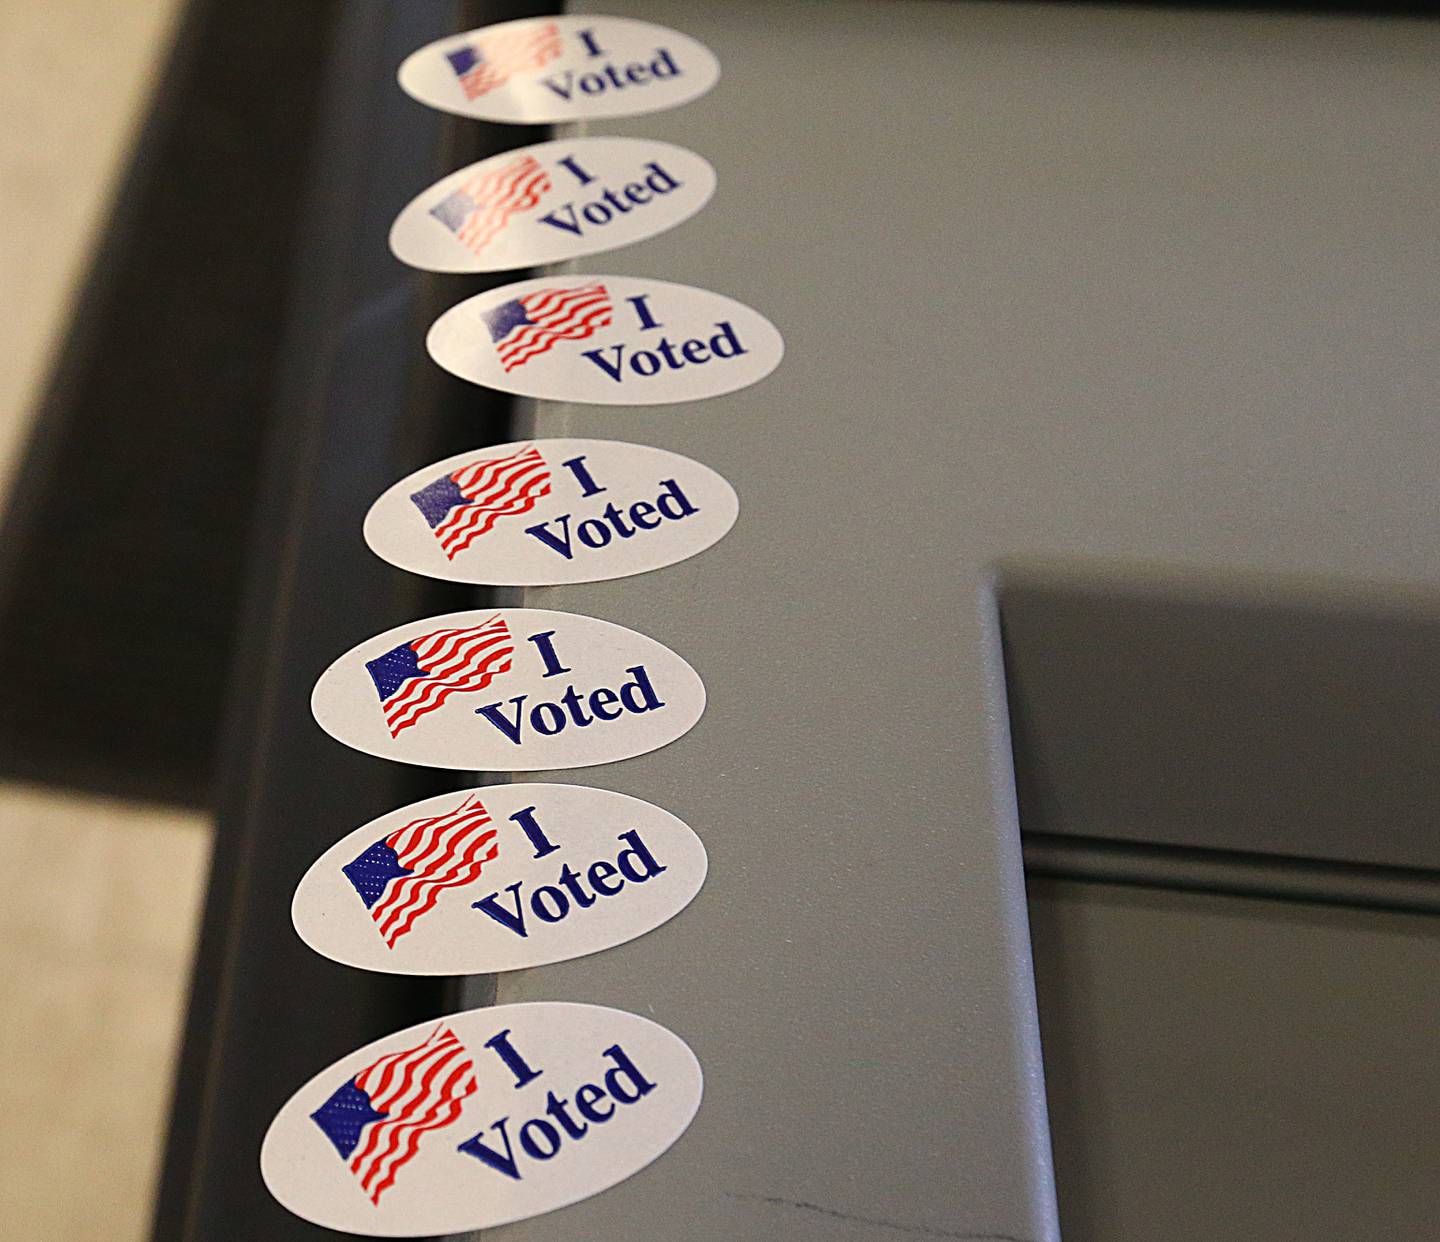 "I Voted" stickers are placed on a voting machine at the Ladd Community Center on Tuesday April 6, 2021.